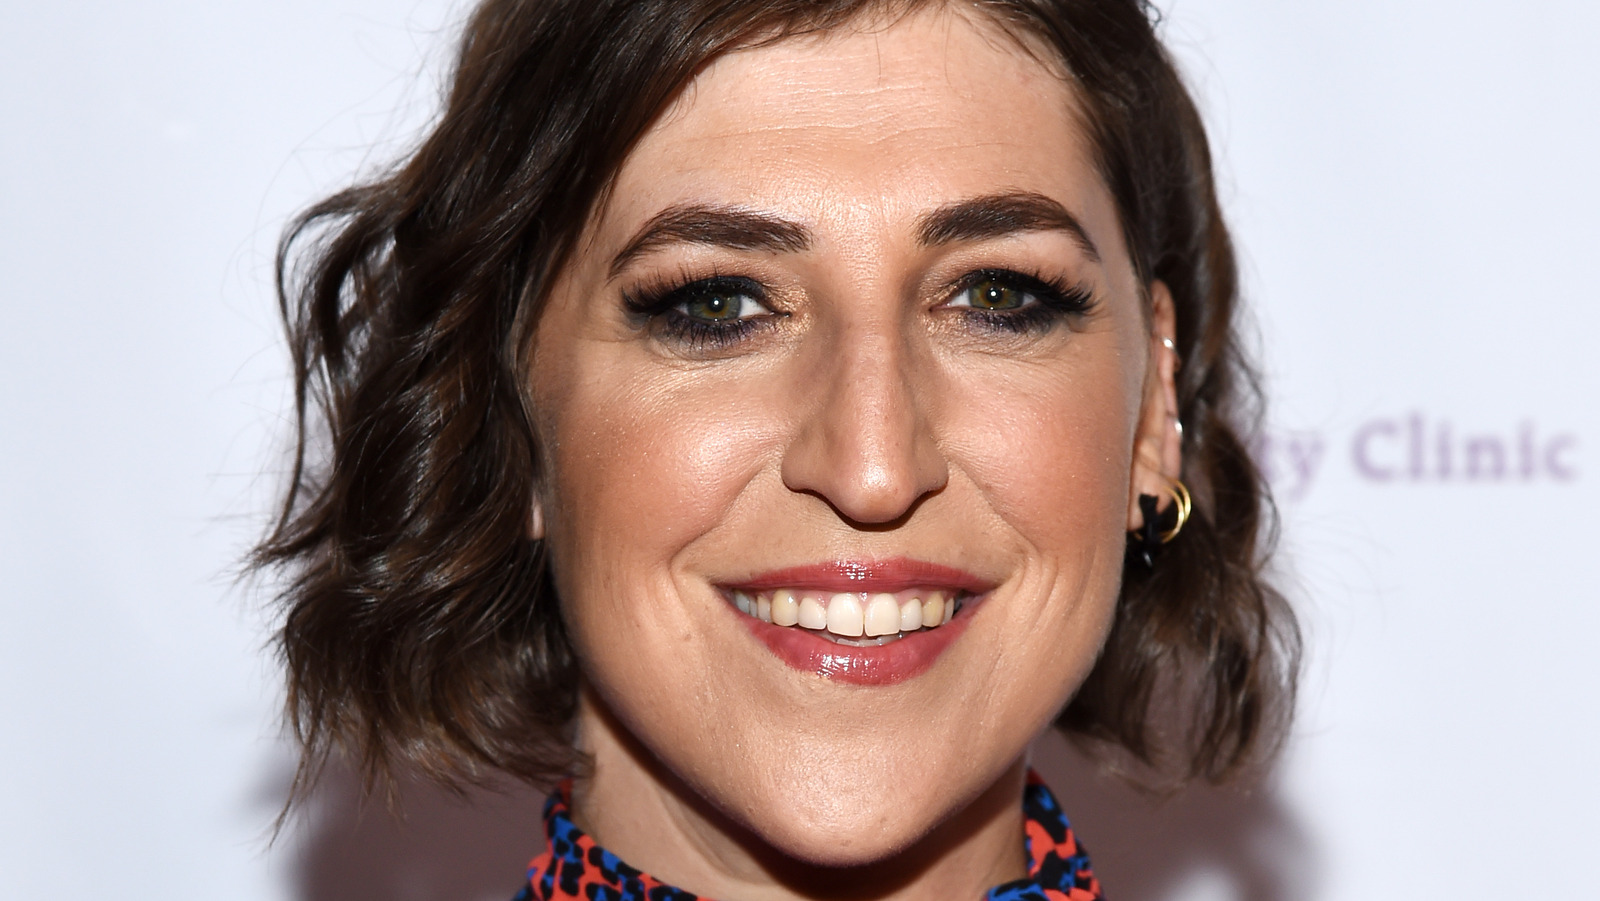 what does mayim bialik have a phd in